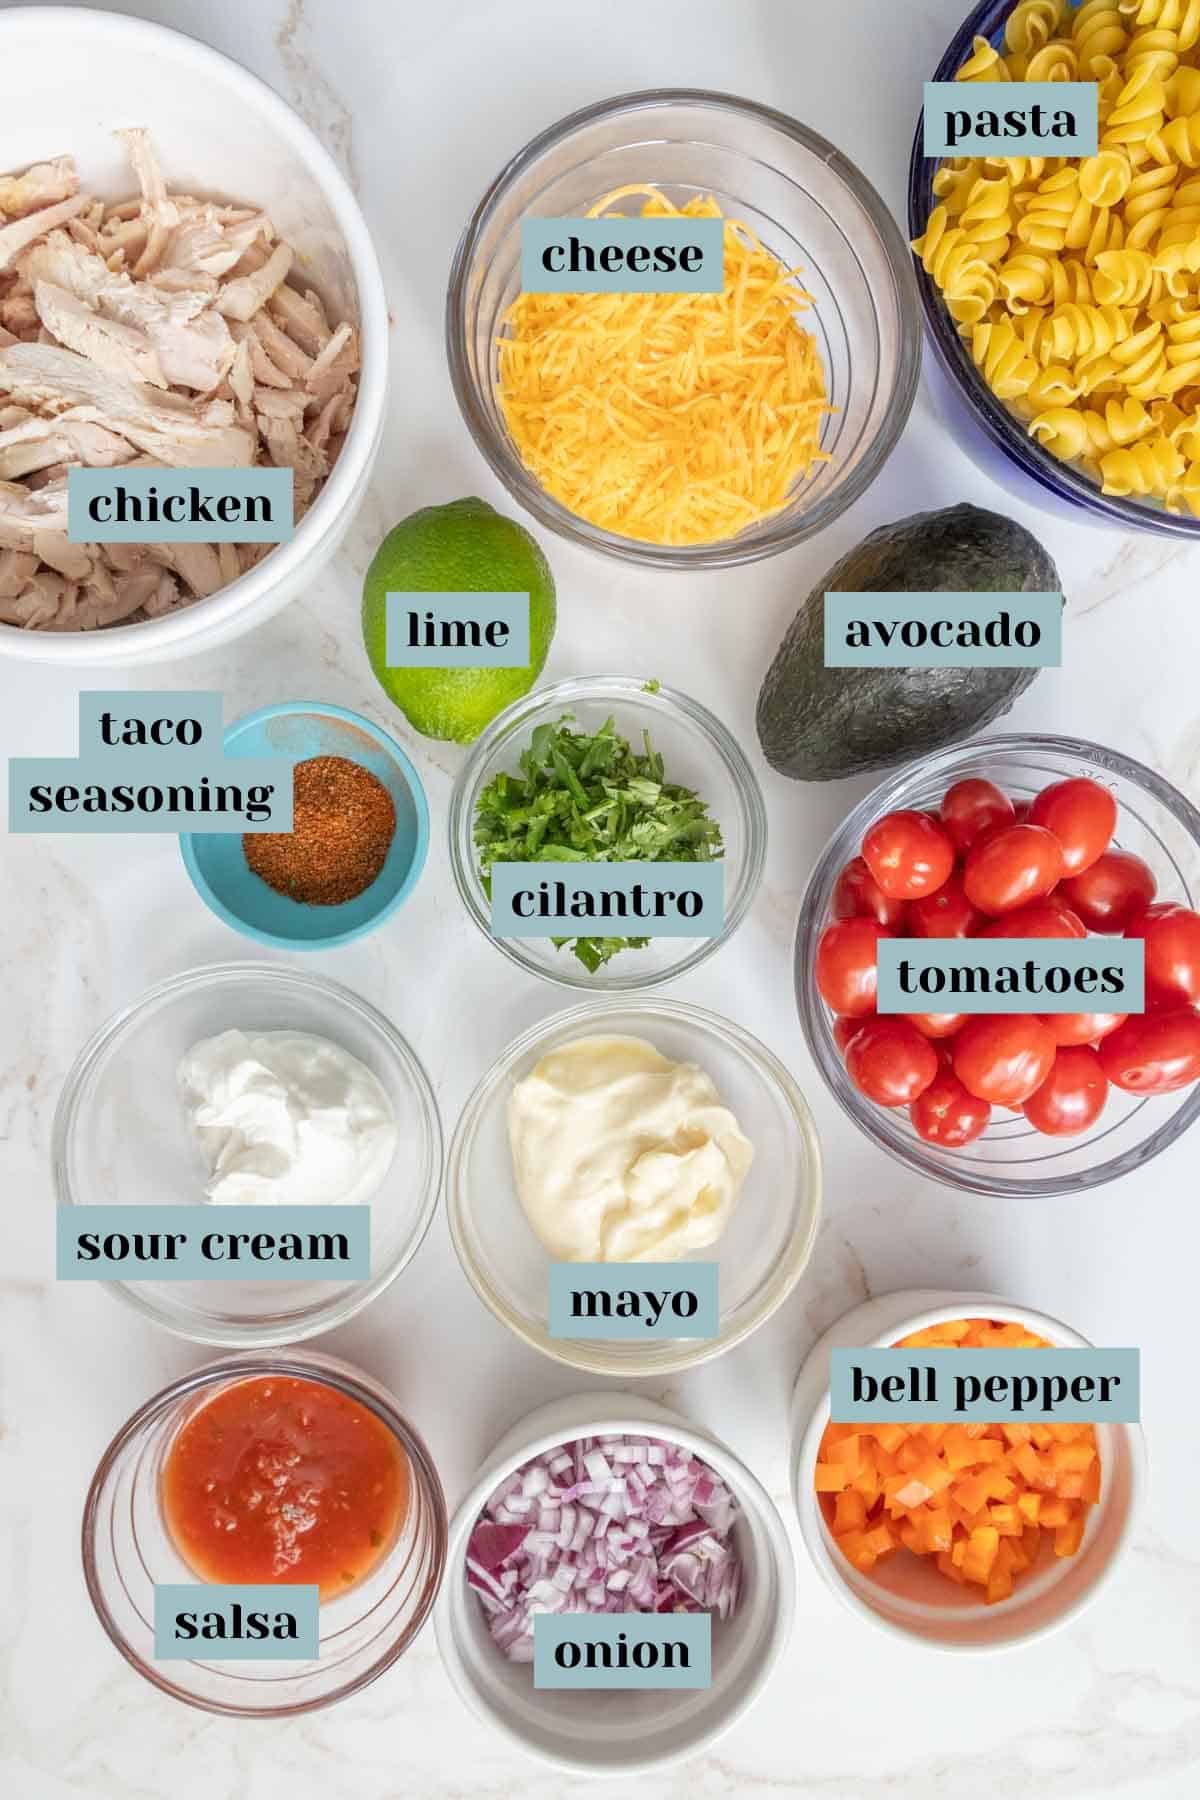 Various ingredients for a meal are laid out in bowls on a countertop, including pasta, shredded chicken, cheese, lime, avocado, taco seasoning, cilantro, tomatoes, sour cream, mayo, salsa, onion, and bell pepper.